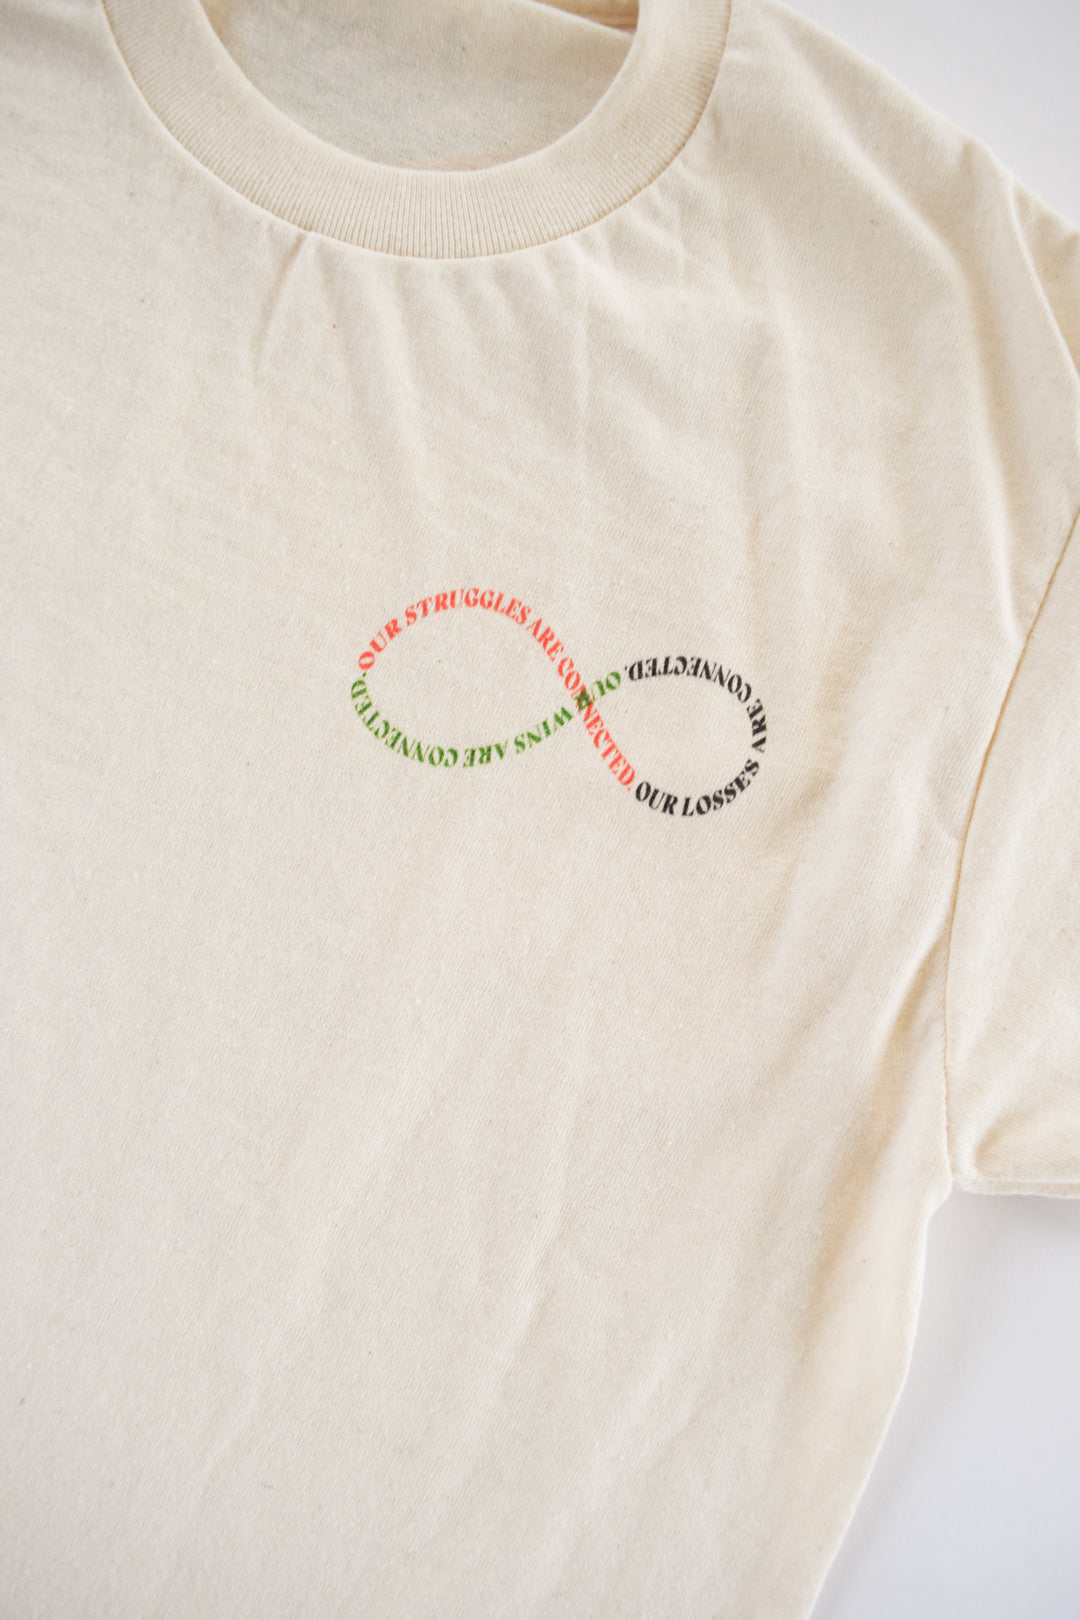 Our Wins Are Connected T-Shirt